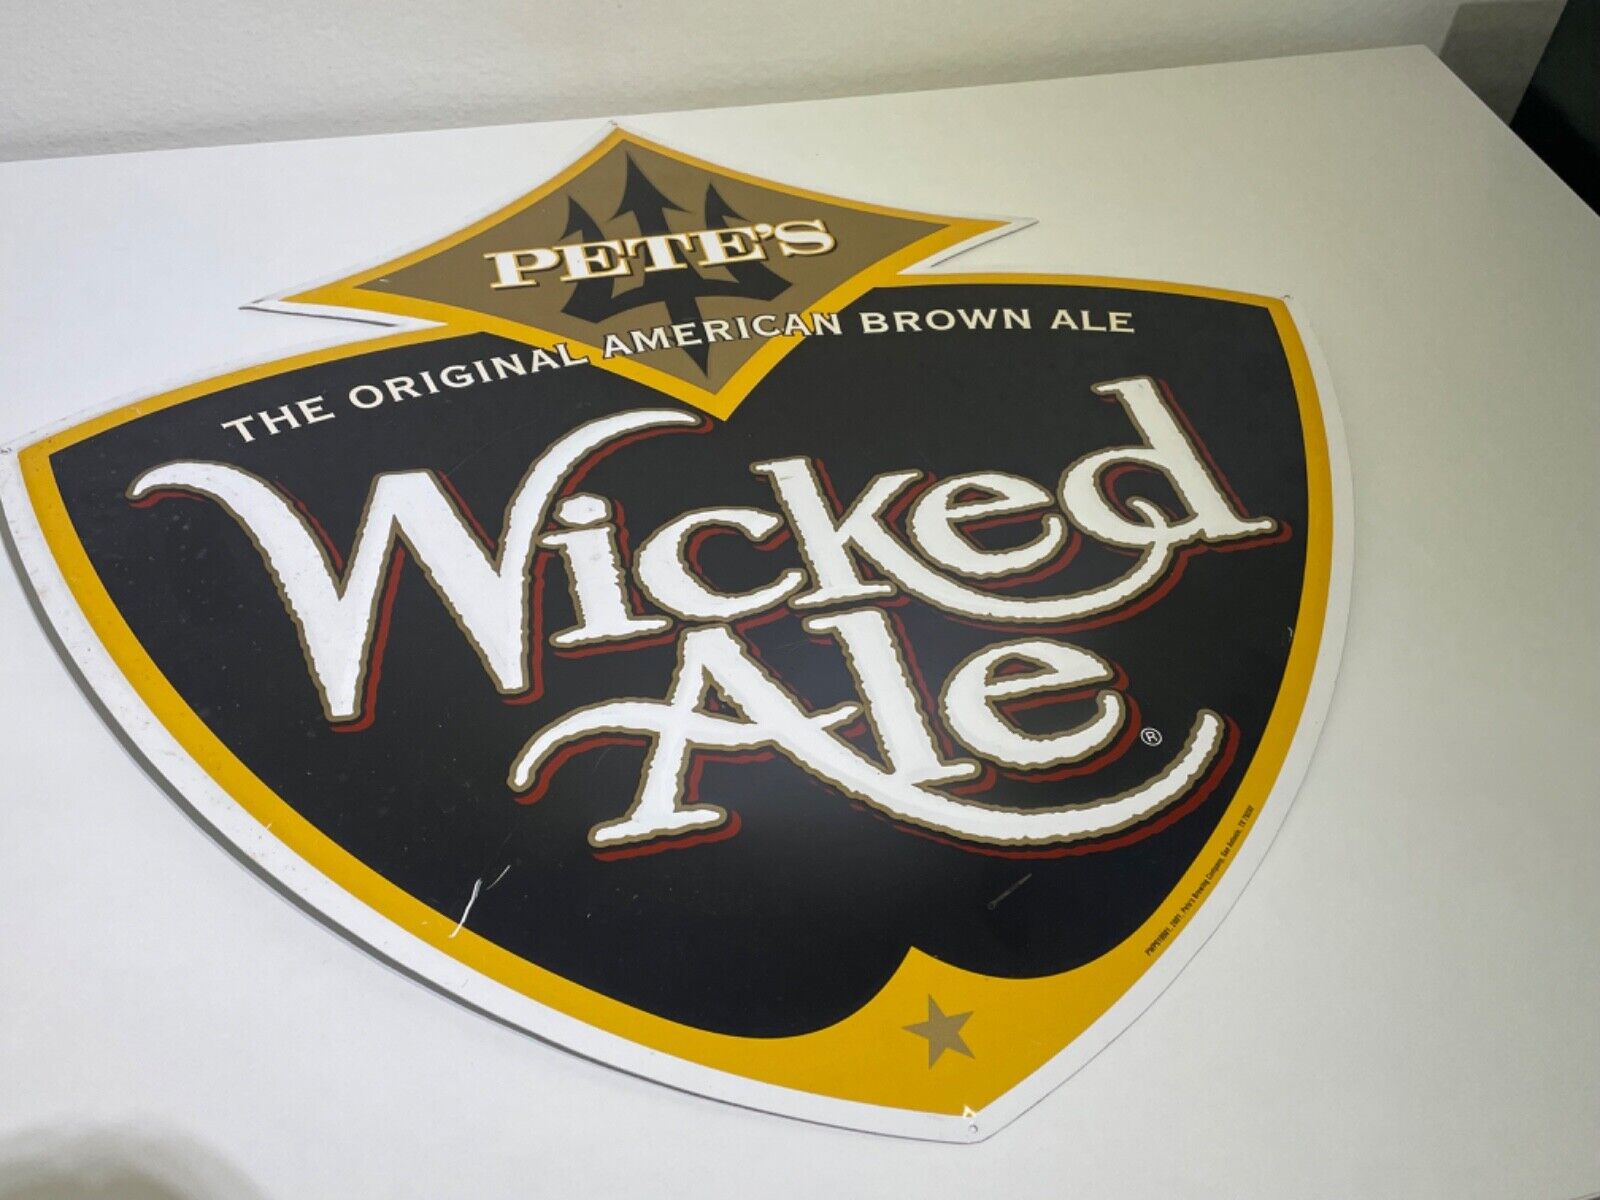 Pete's Wicked Ale 2001 | The Original American Brown Ale Tin Sign Man Cave 27x27